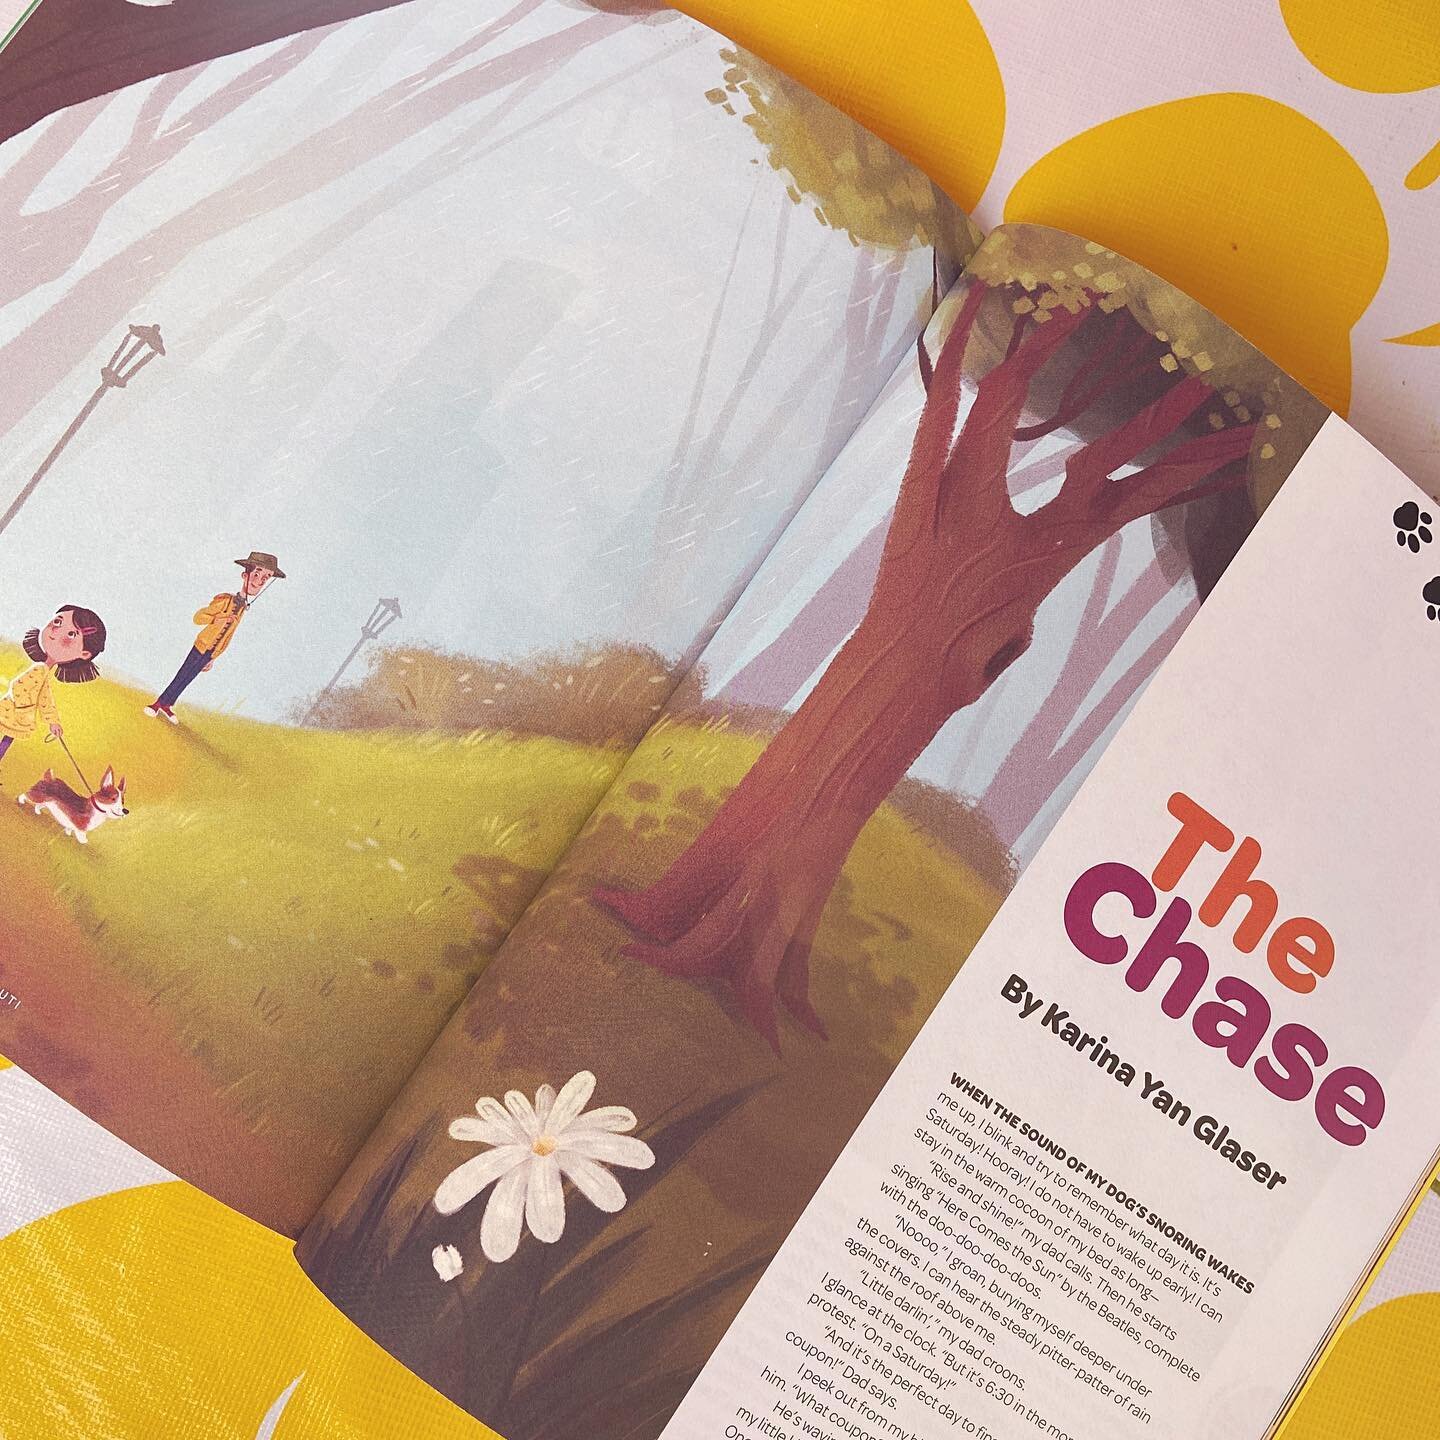 I absolutely love @kazoomagazine and was honored to contribute another short story for them for their March 2023 issue. I threw all of my favorite things into this story: dogs, Central Park, family time, and the kindness of New Yorkers. And I was so 